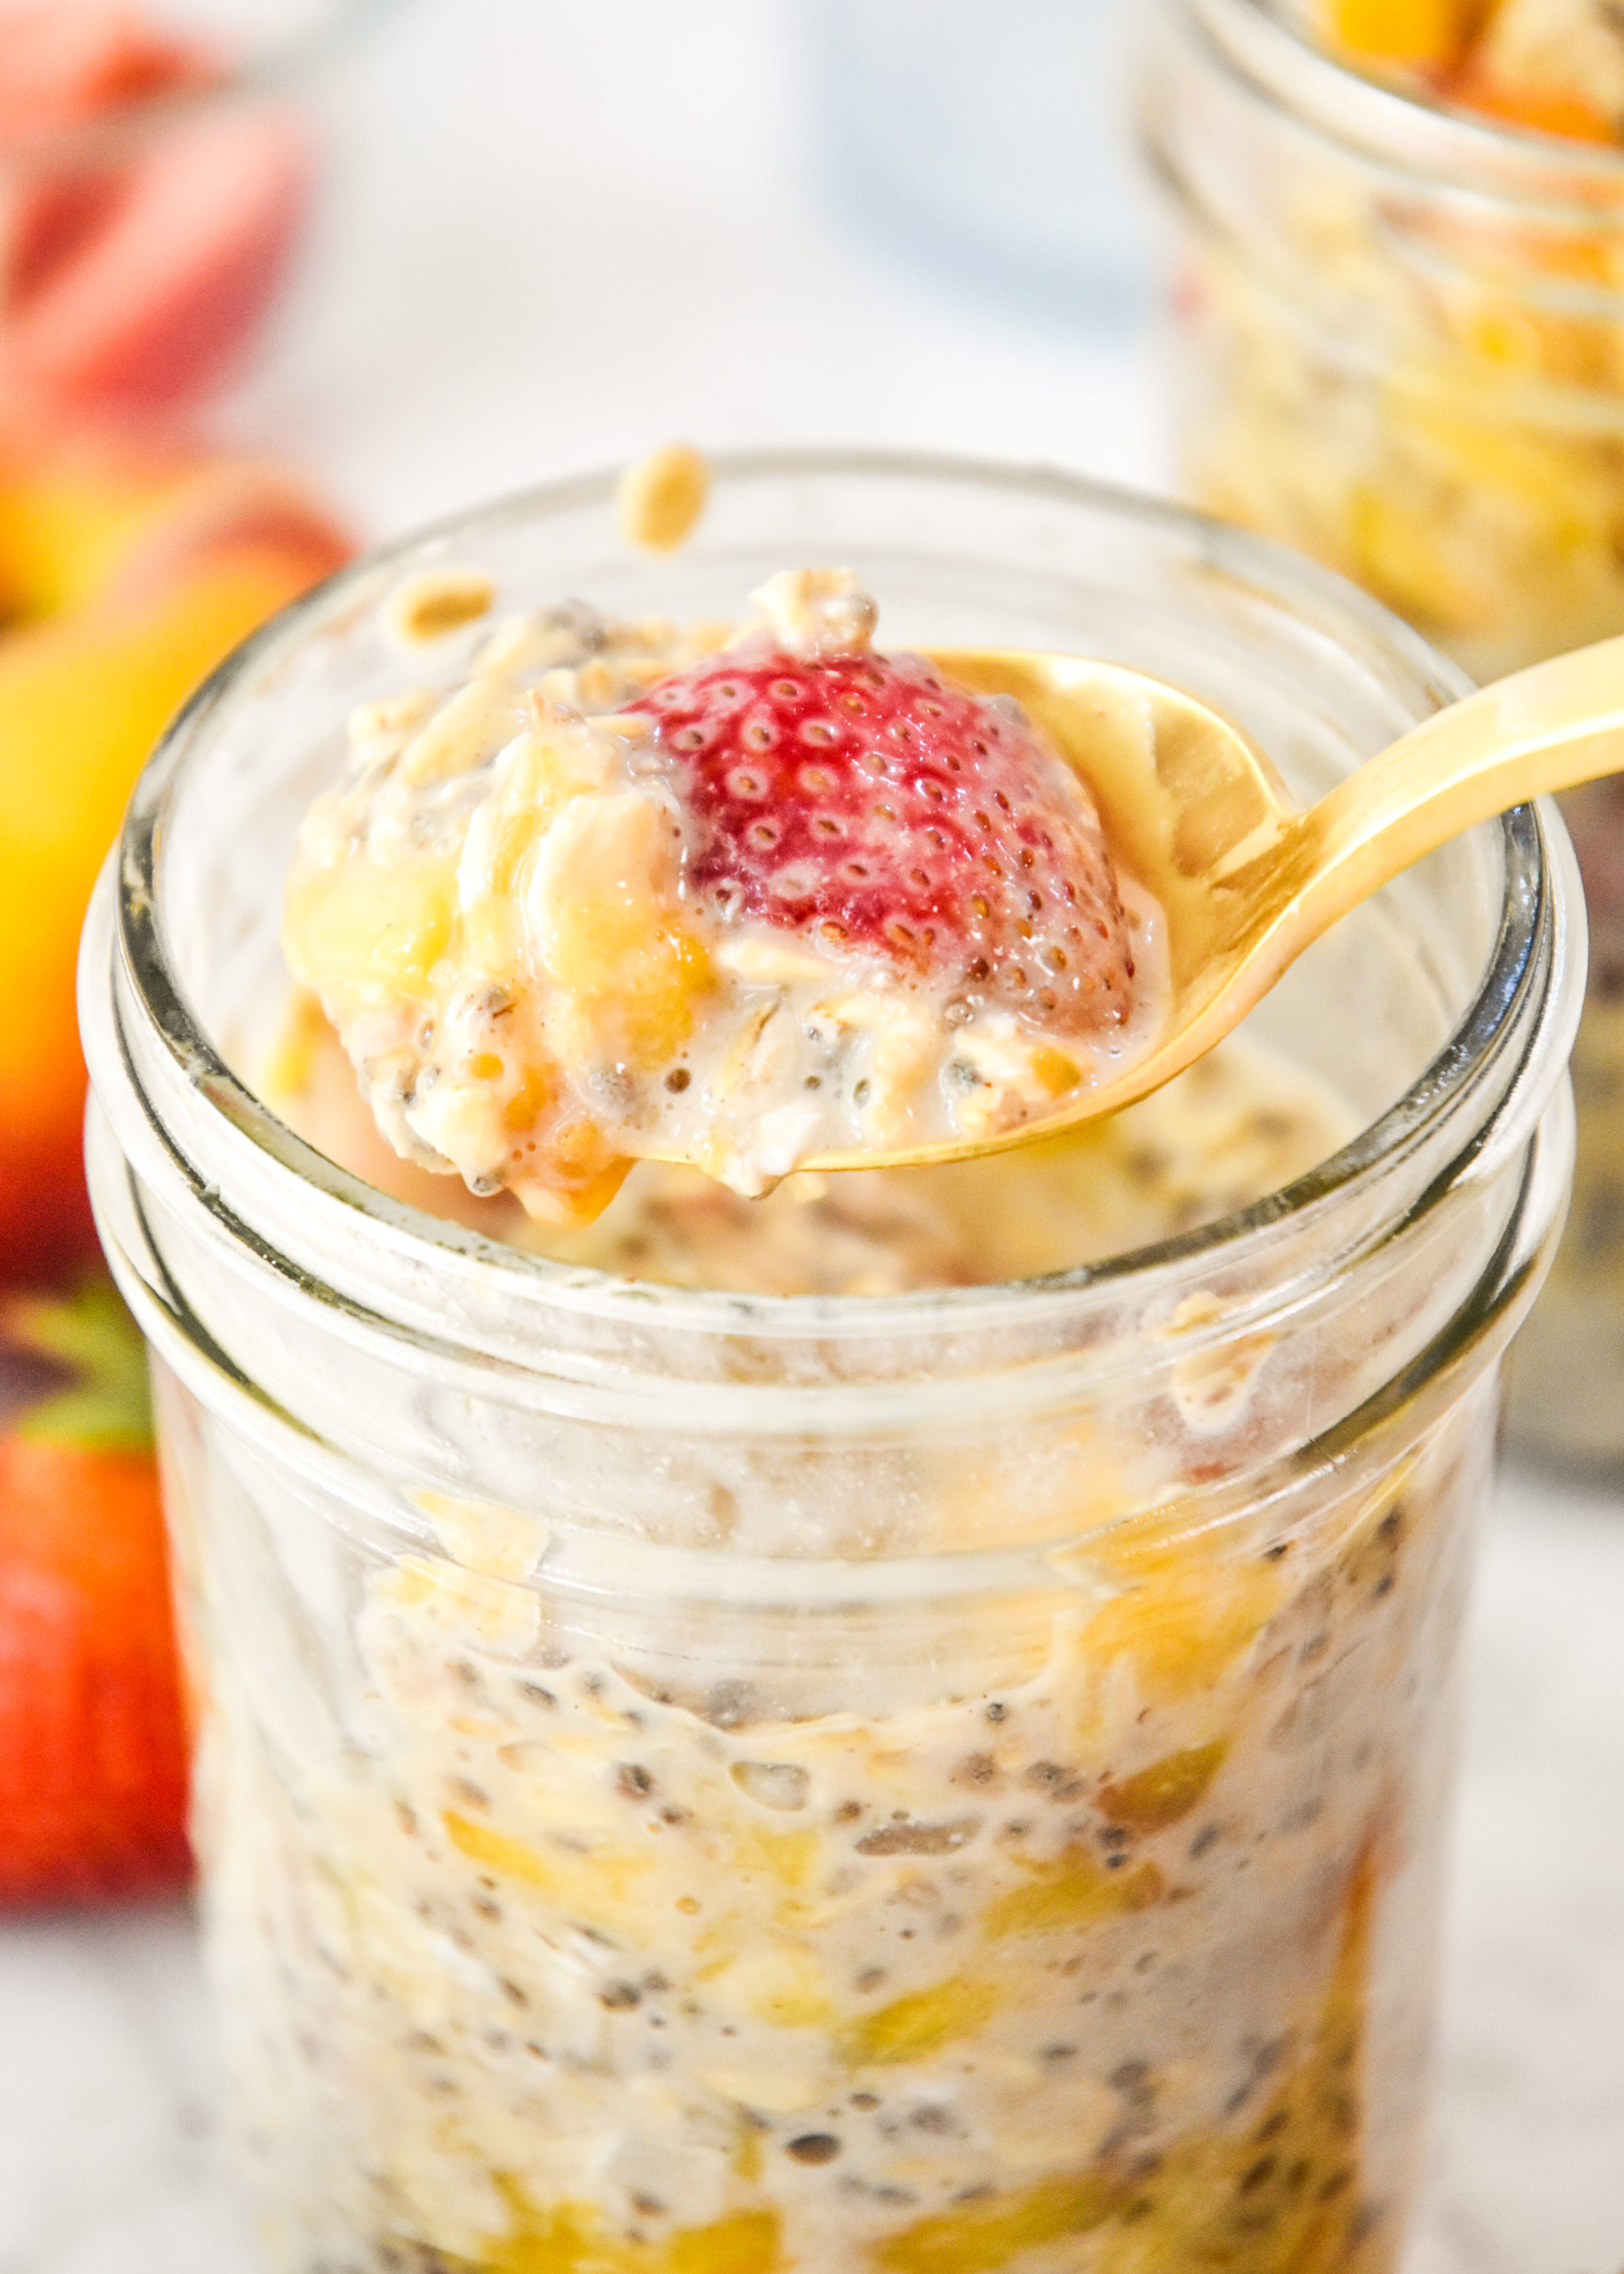 spoonful of strawberry peach overnight oats.